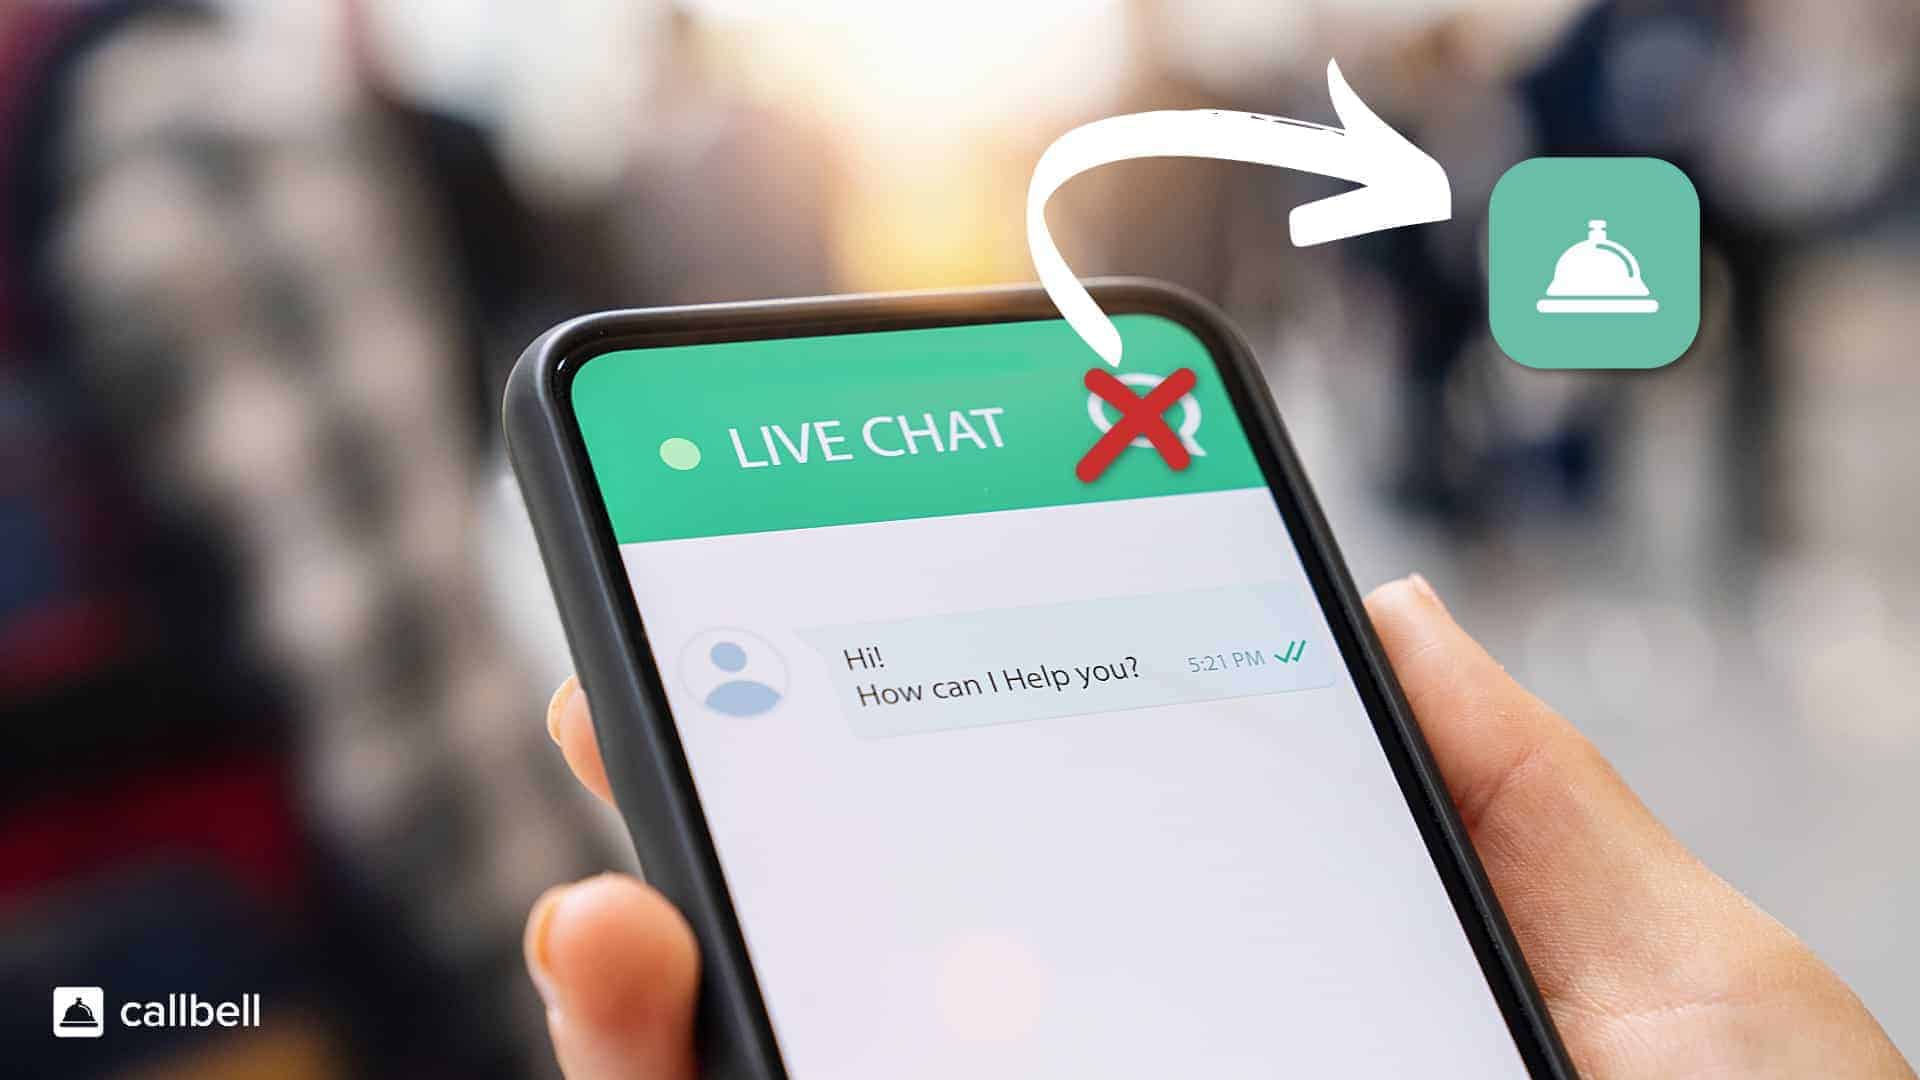 Difference between a live chat and messaging apps